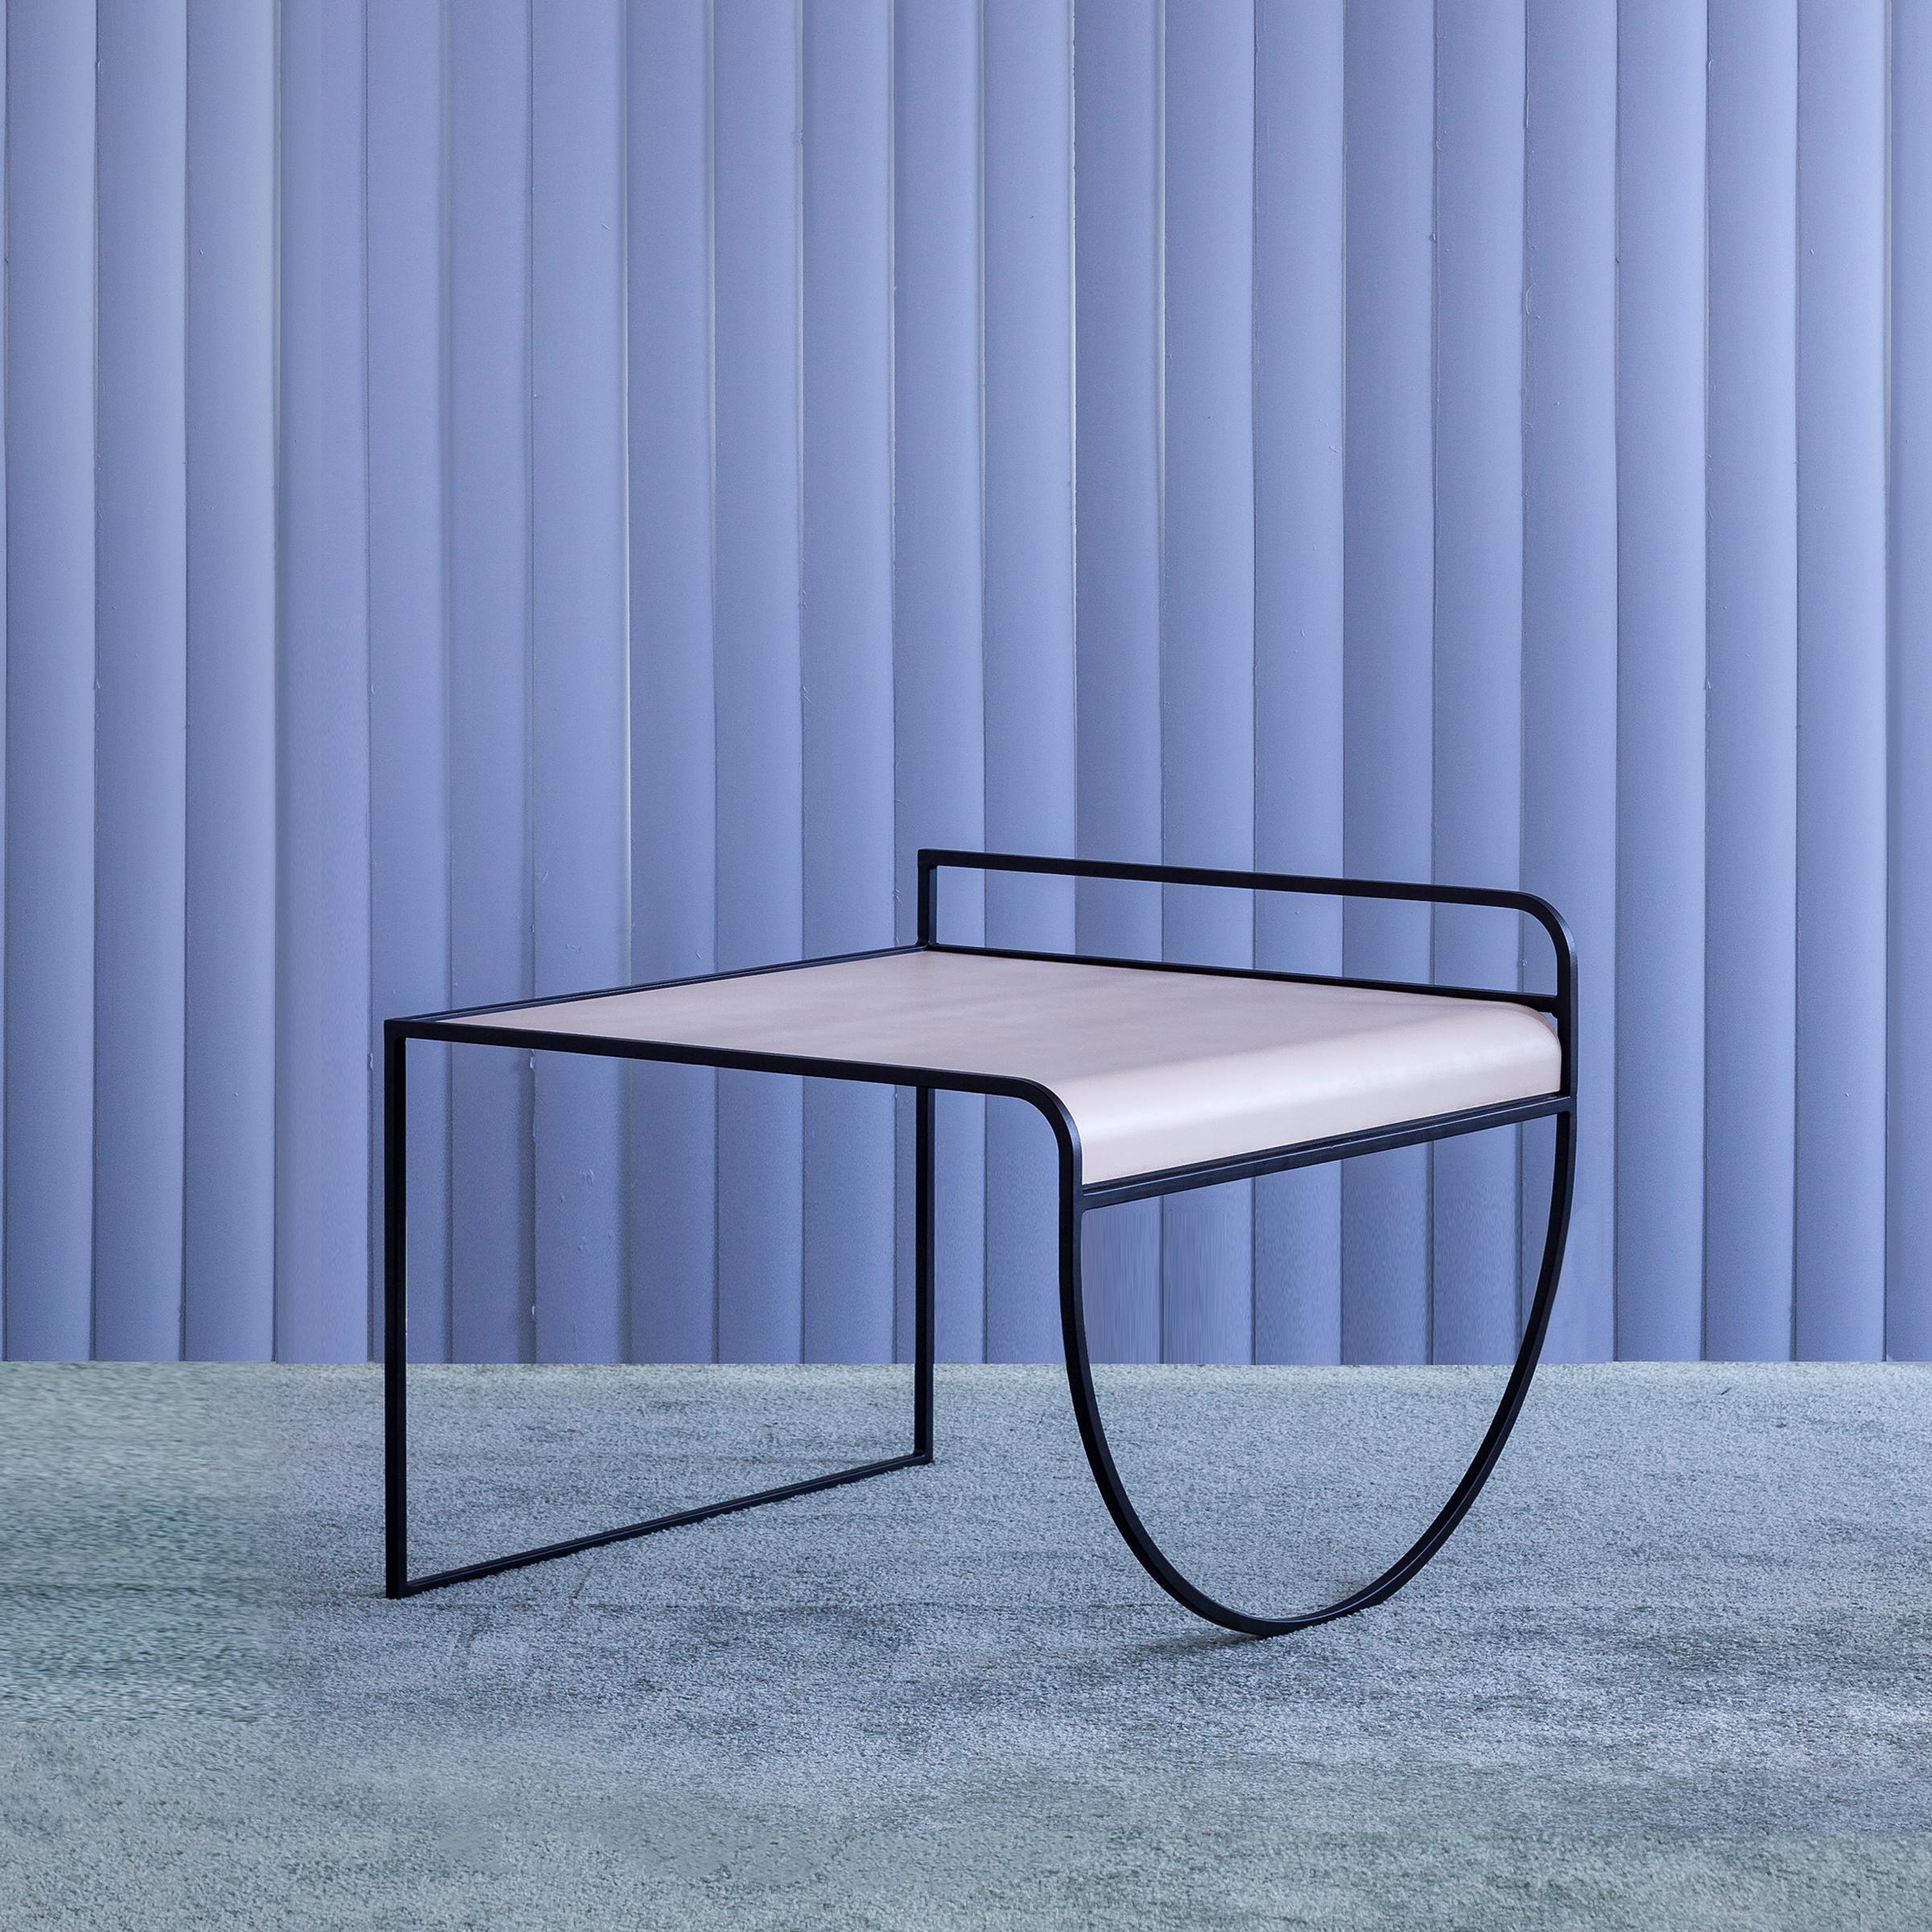 SW side table by soft-geometry
Materials: Powder coat steel frame with a flat, Bent steel top
Dimensions: 26 x 24.5 x 20” H  

Modern metal side table with a belly, featuring a fluid powder coat steel frame with a flat, bent steel top. The sw